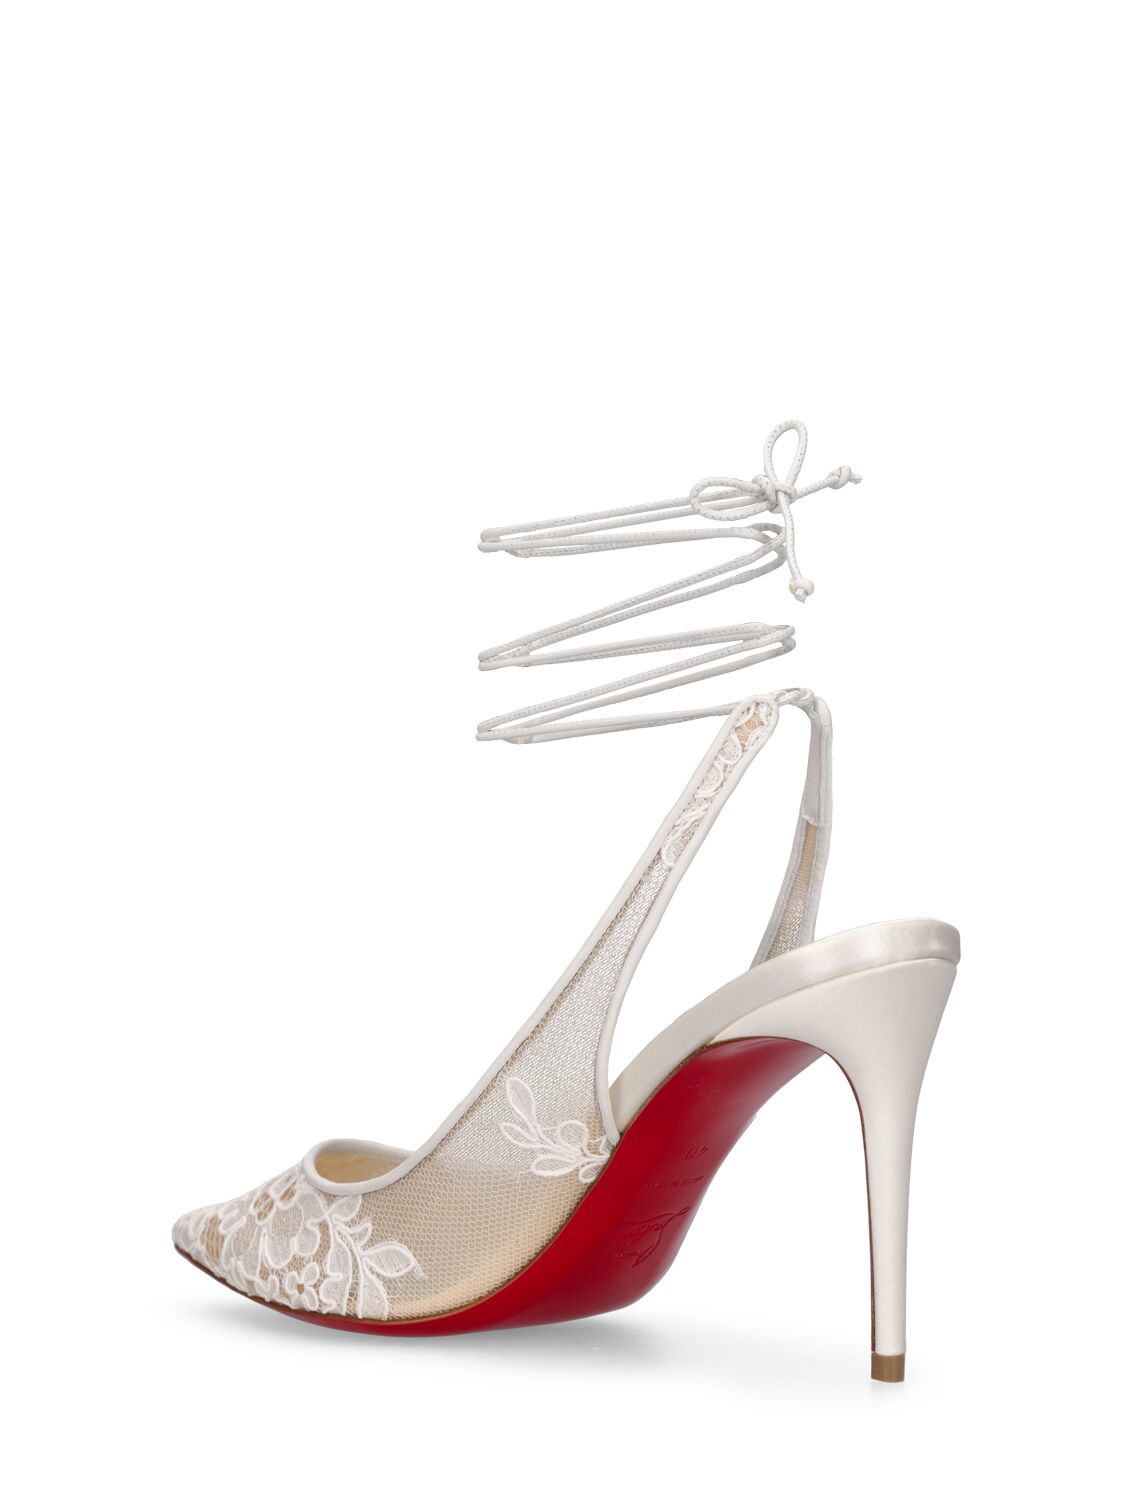 Shop Christian Louboutin 85mm Kate Lace Pumps In White